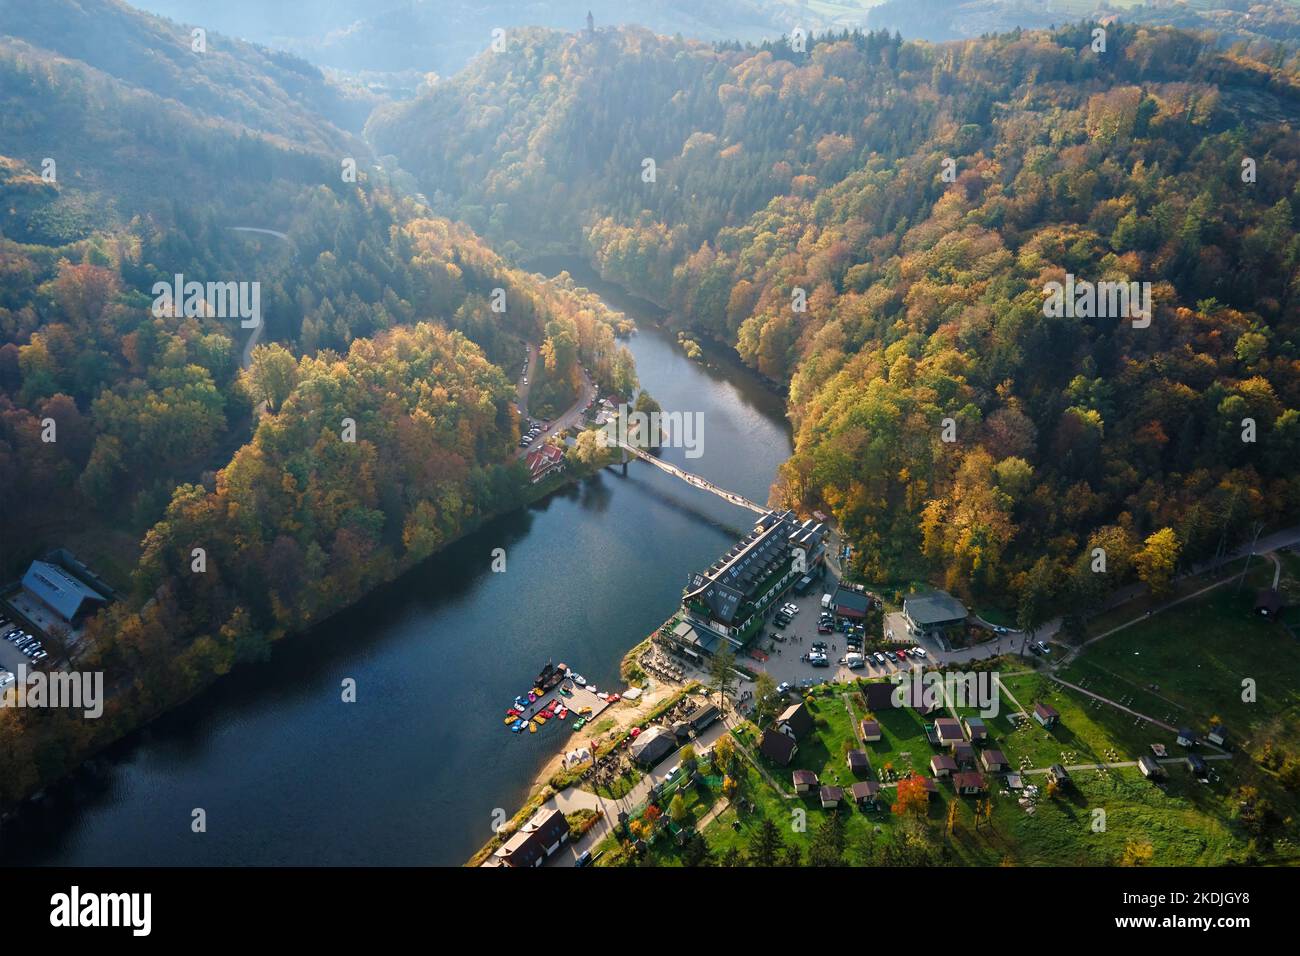 Recreation area near Grodno castle in Zagorze, Poland. Beaituful autumn landscape with mountains covered with forest, river and bridge for people over Stock Photo